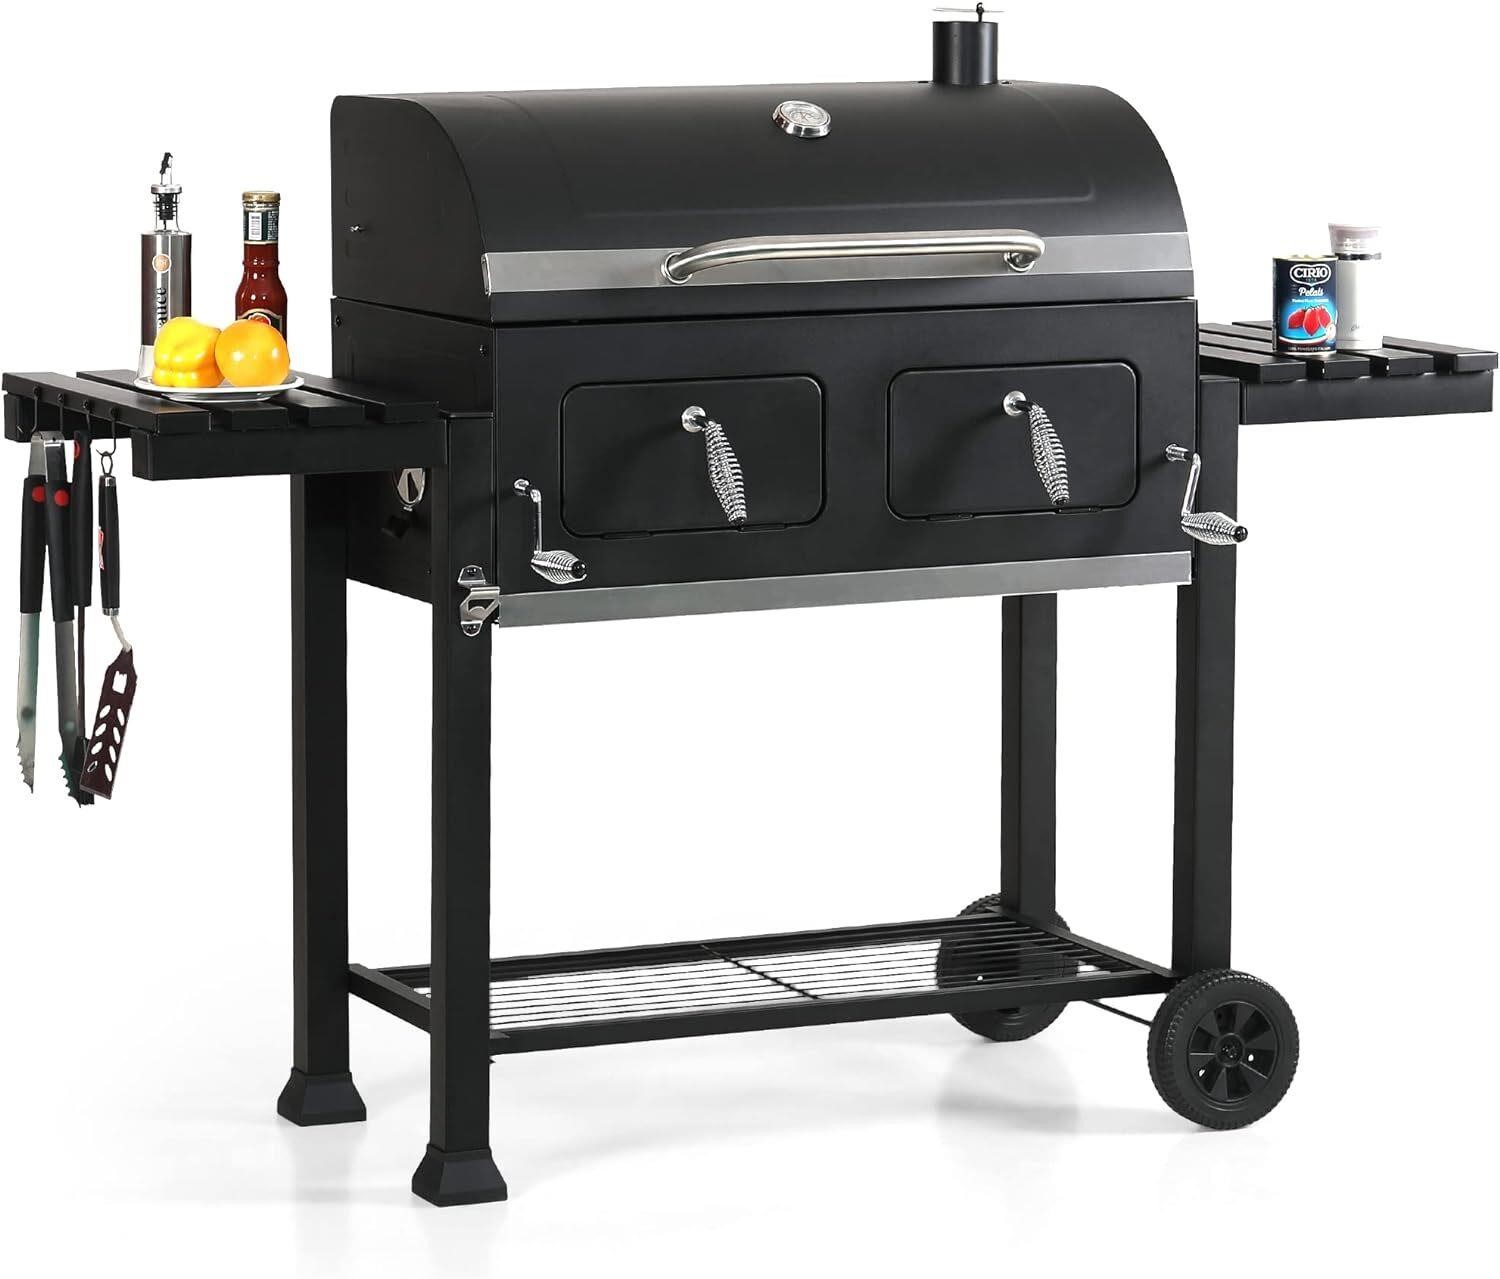 Extra Large Charcoal BBQ Grill with Oversize Area